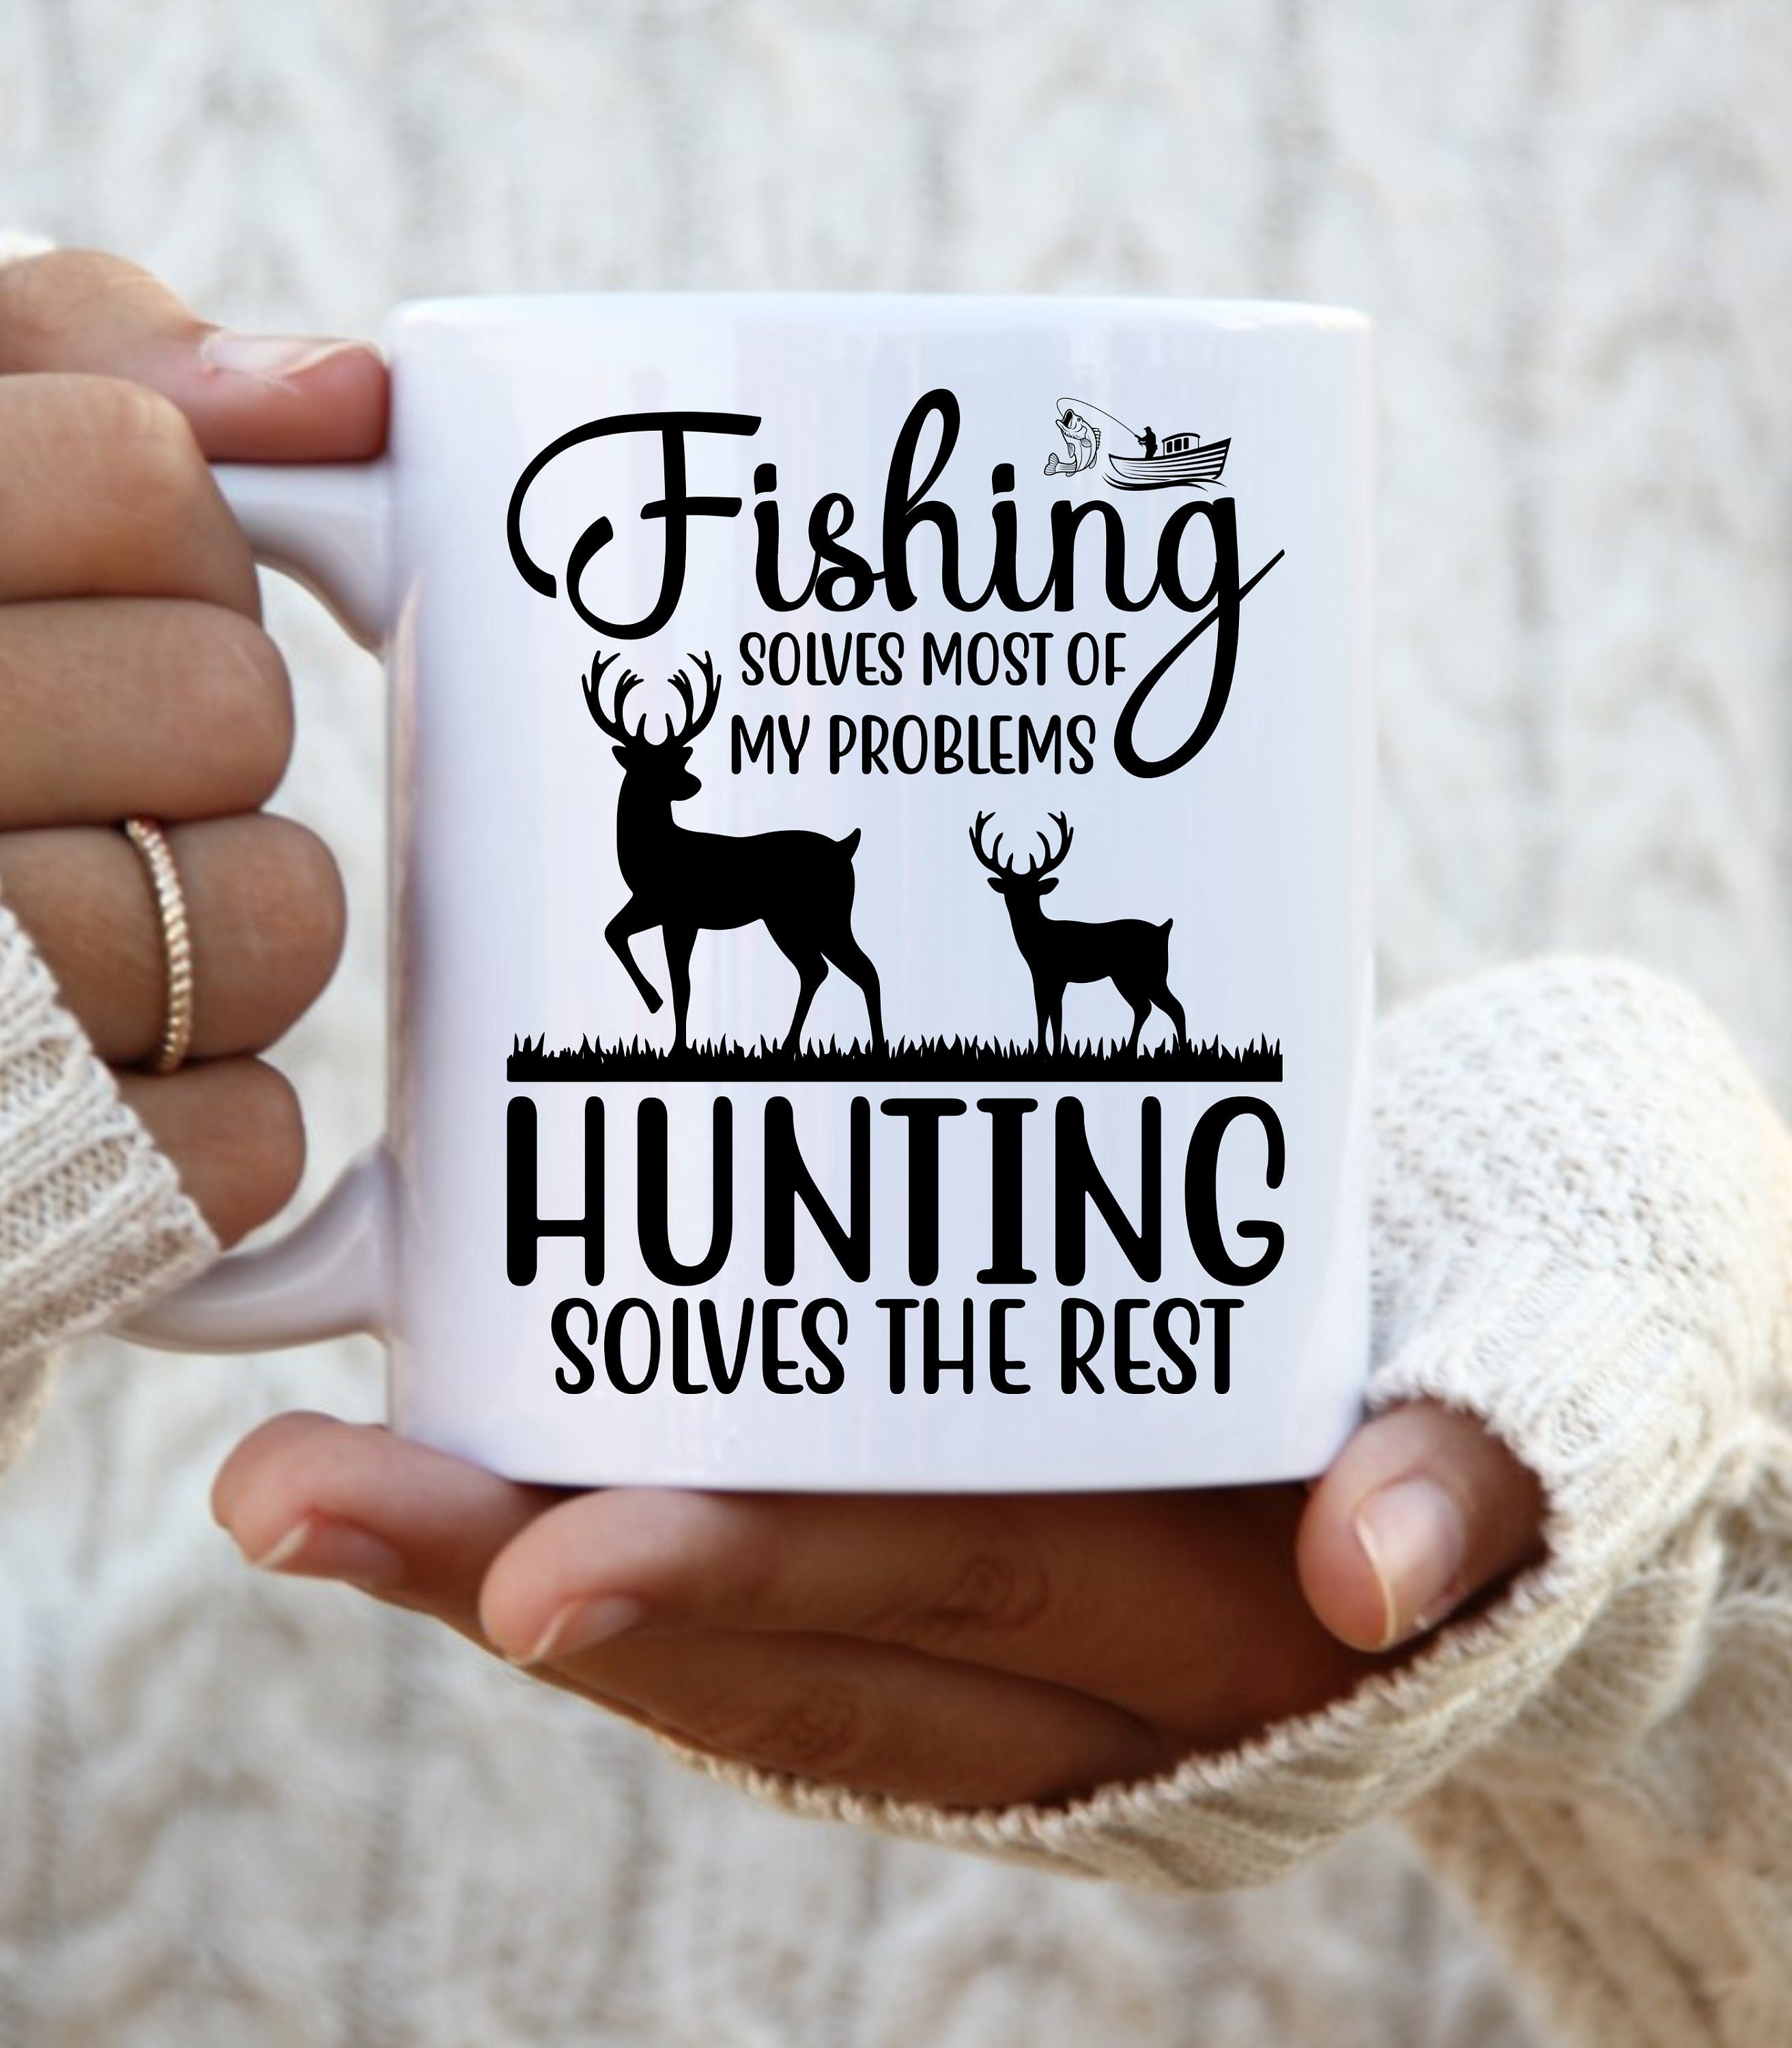 Fishing Gifts for Menhunting Gifts for Menphoto Gifts for Fishermenhunting  Signfathers Day Hunting Giftpersonalized Fathers Day Gifts 